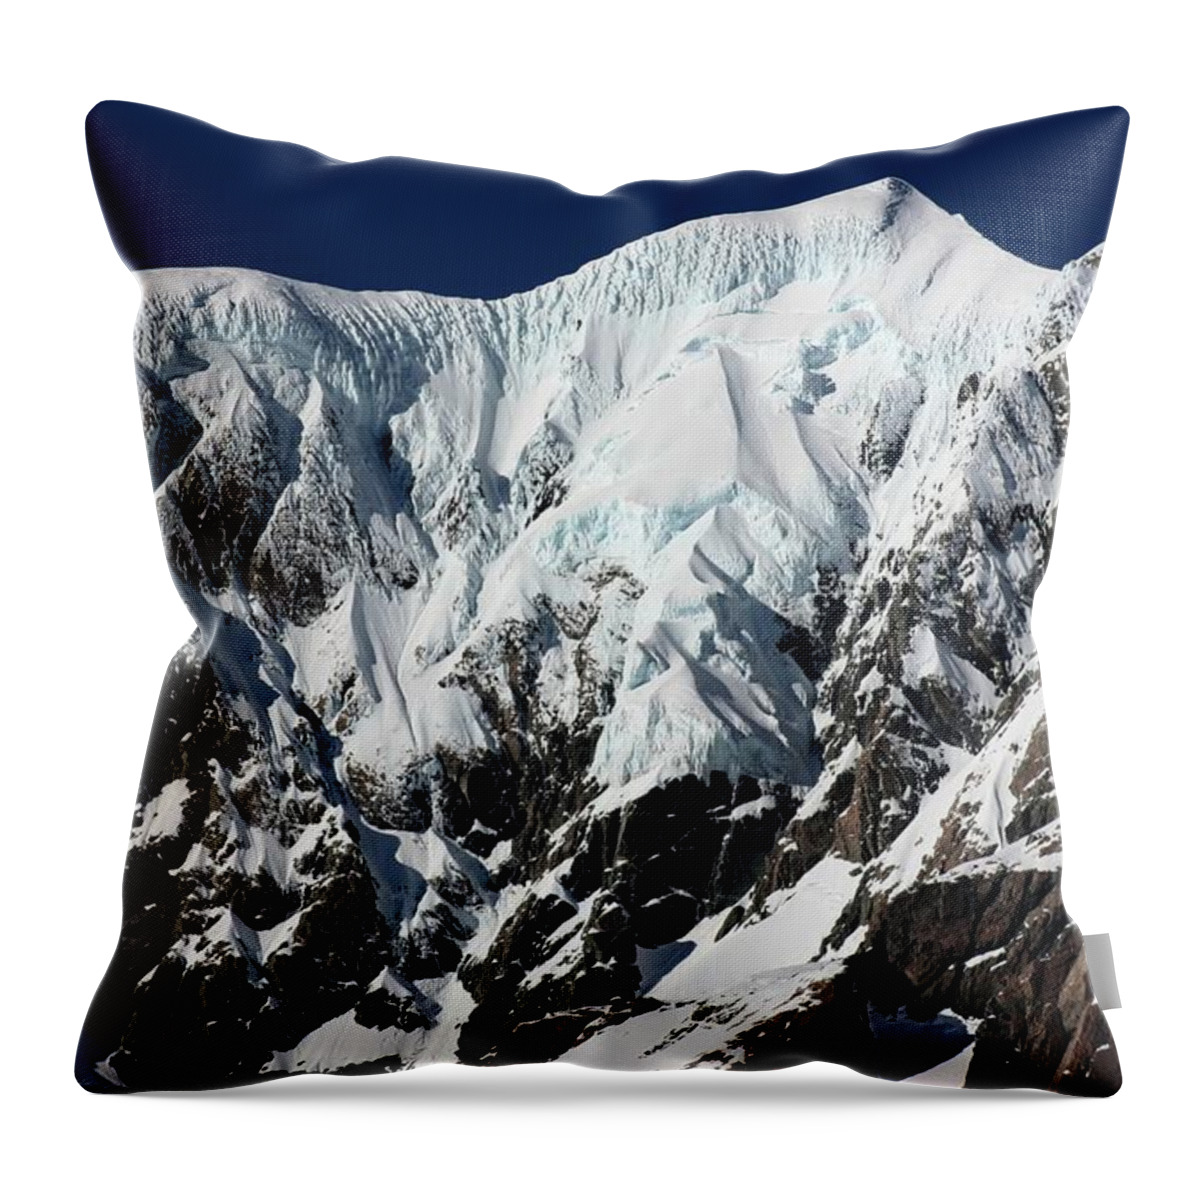 New Zealand Throw Pillow featuring the photograph New Zealand Mountains by Amanda Stadther